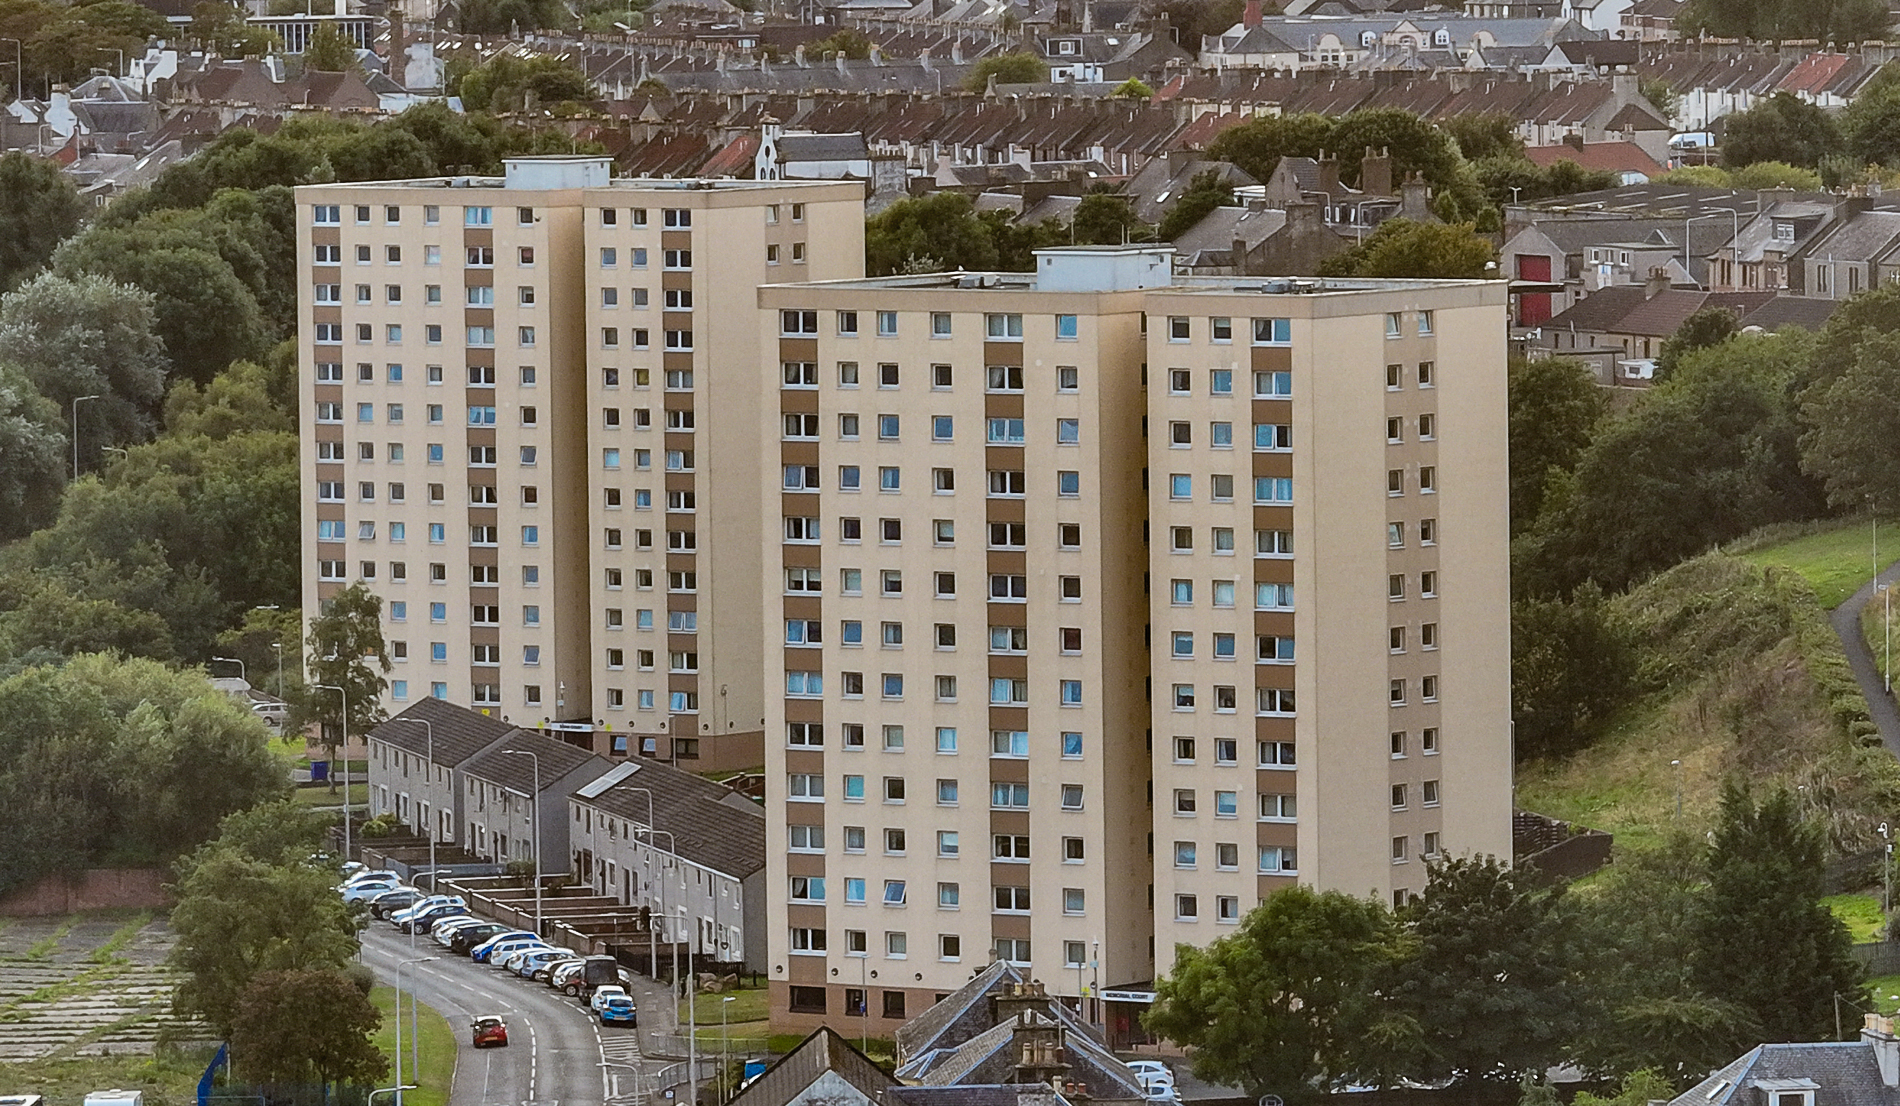 Multi-million pound improvements approved at Methil flats